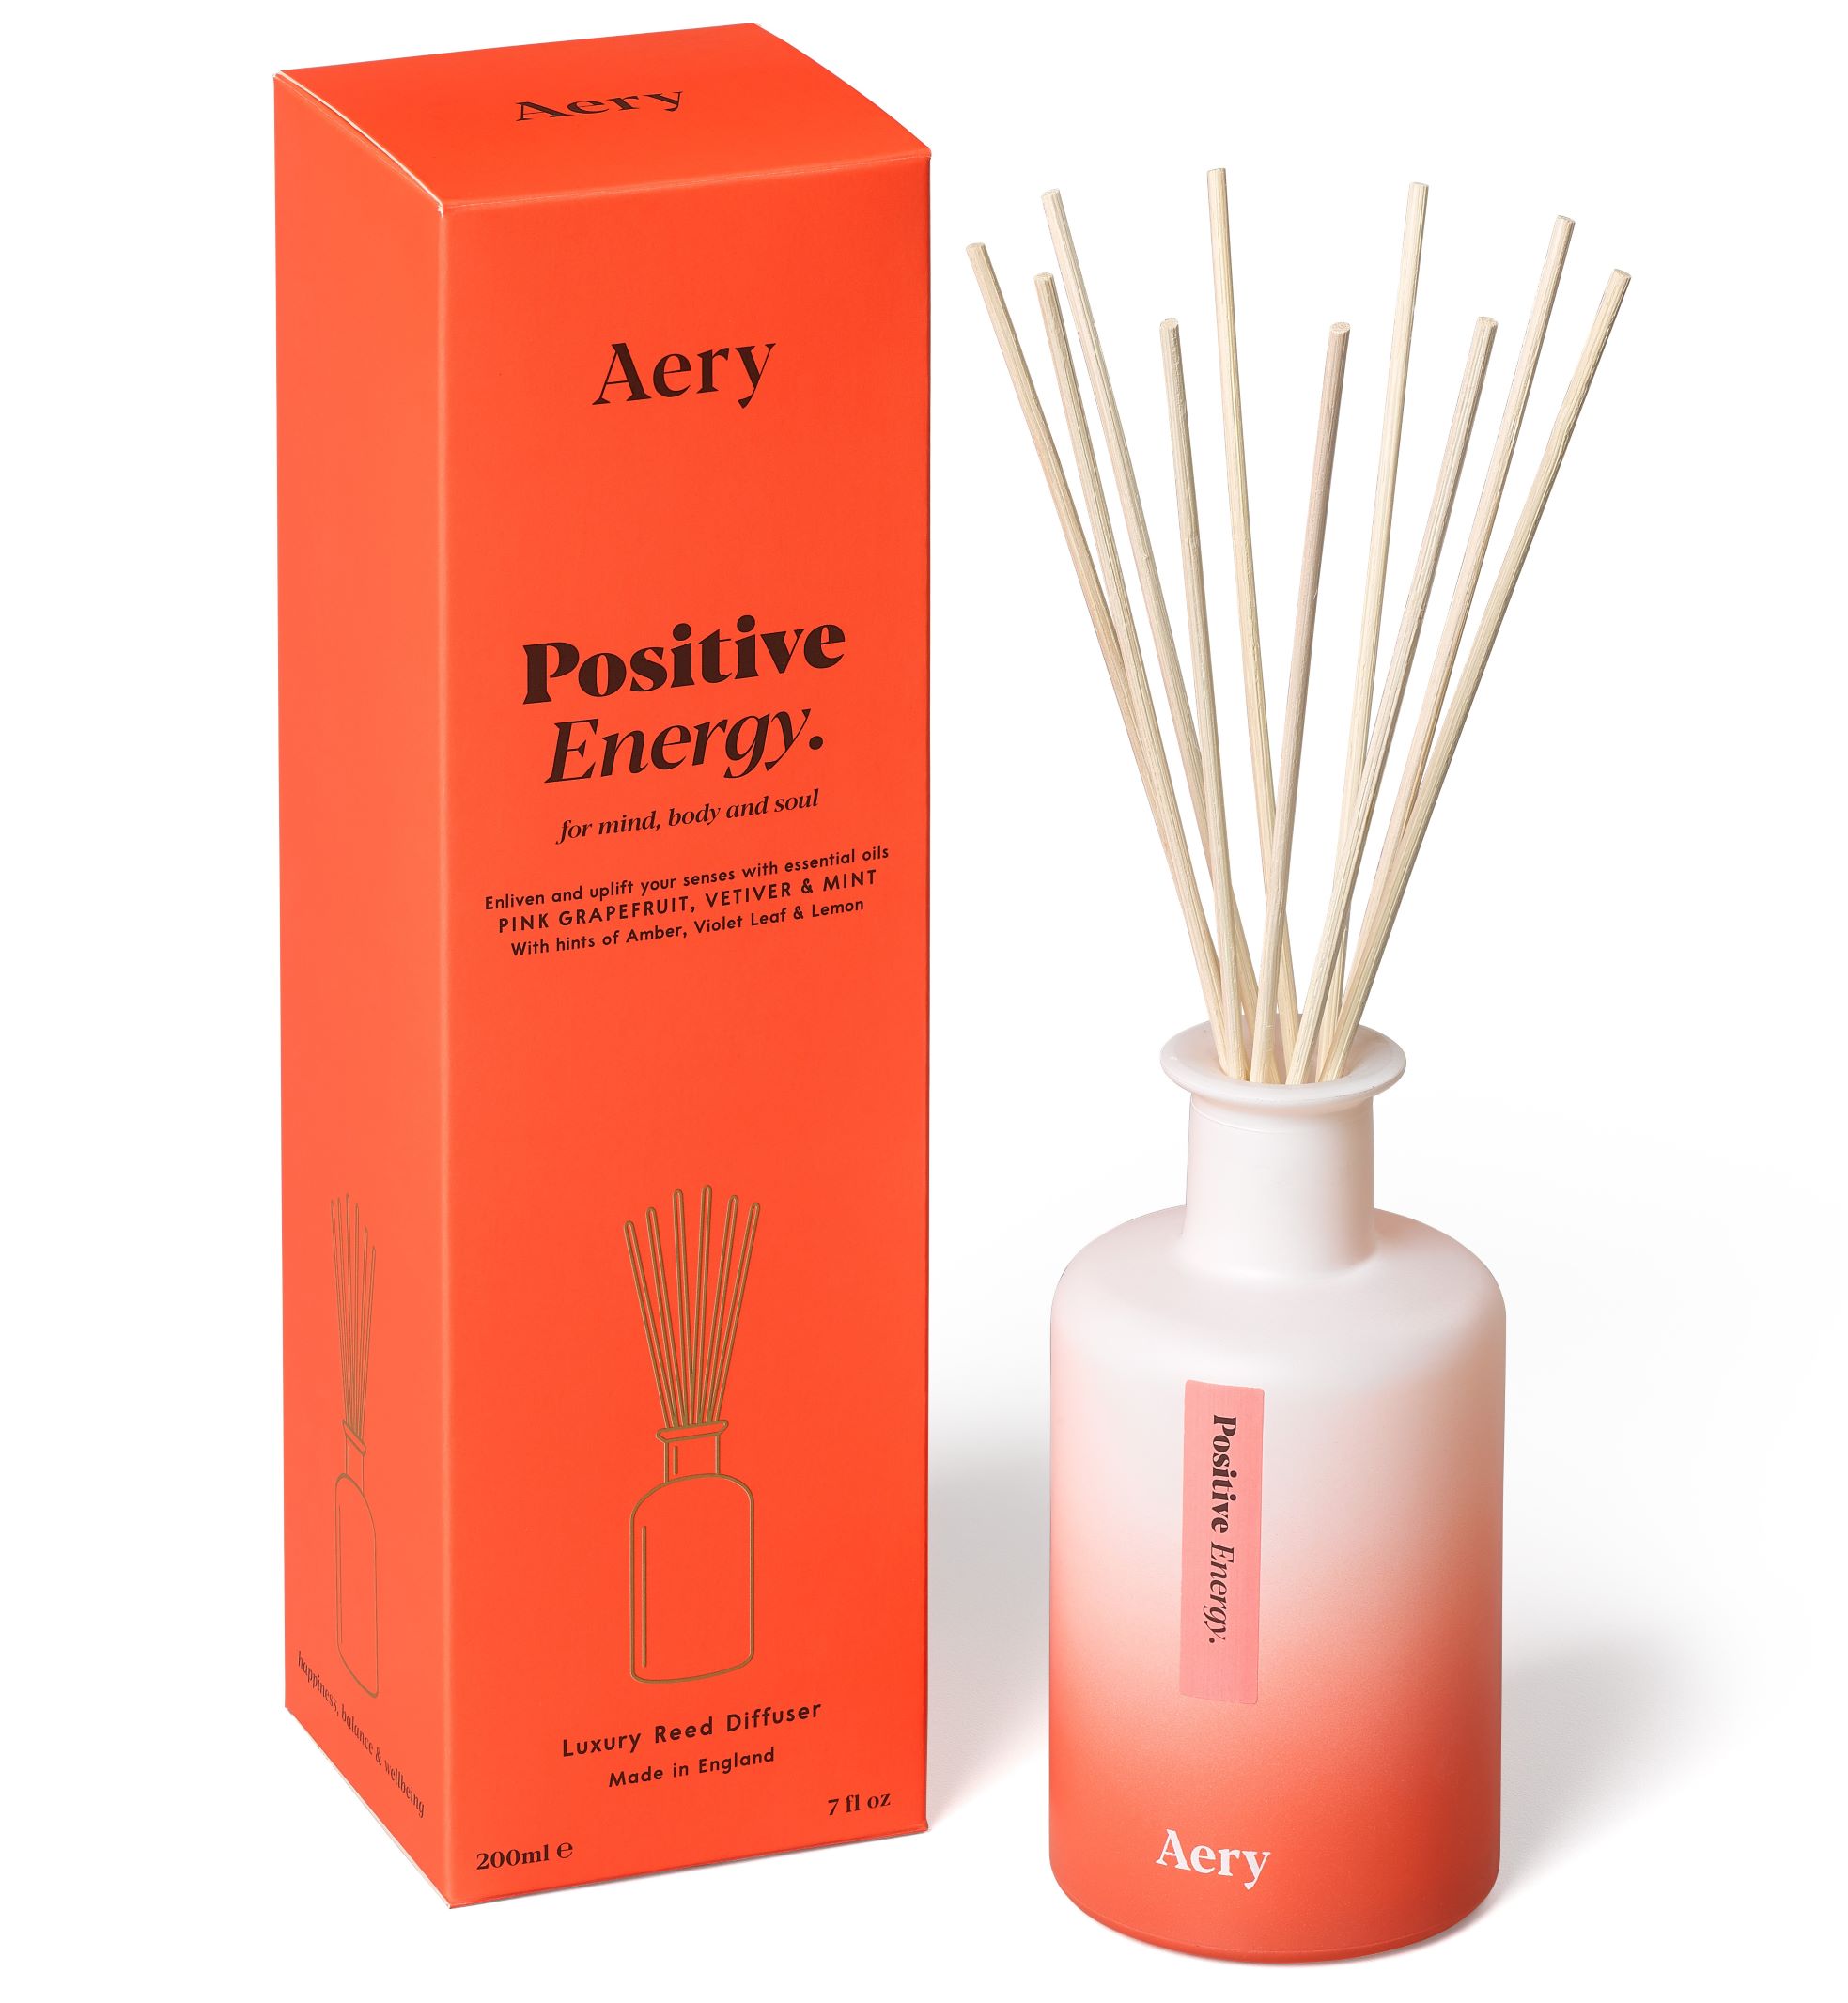 Aery Positive Energy Aromatherapy Reed Diffuser